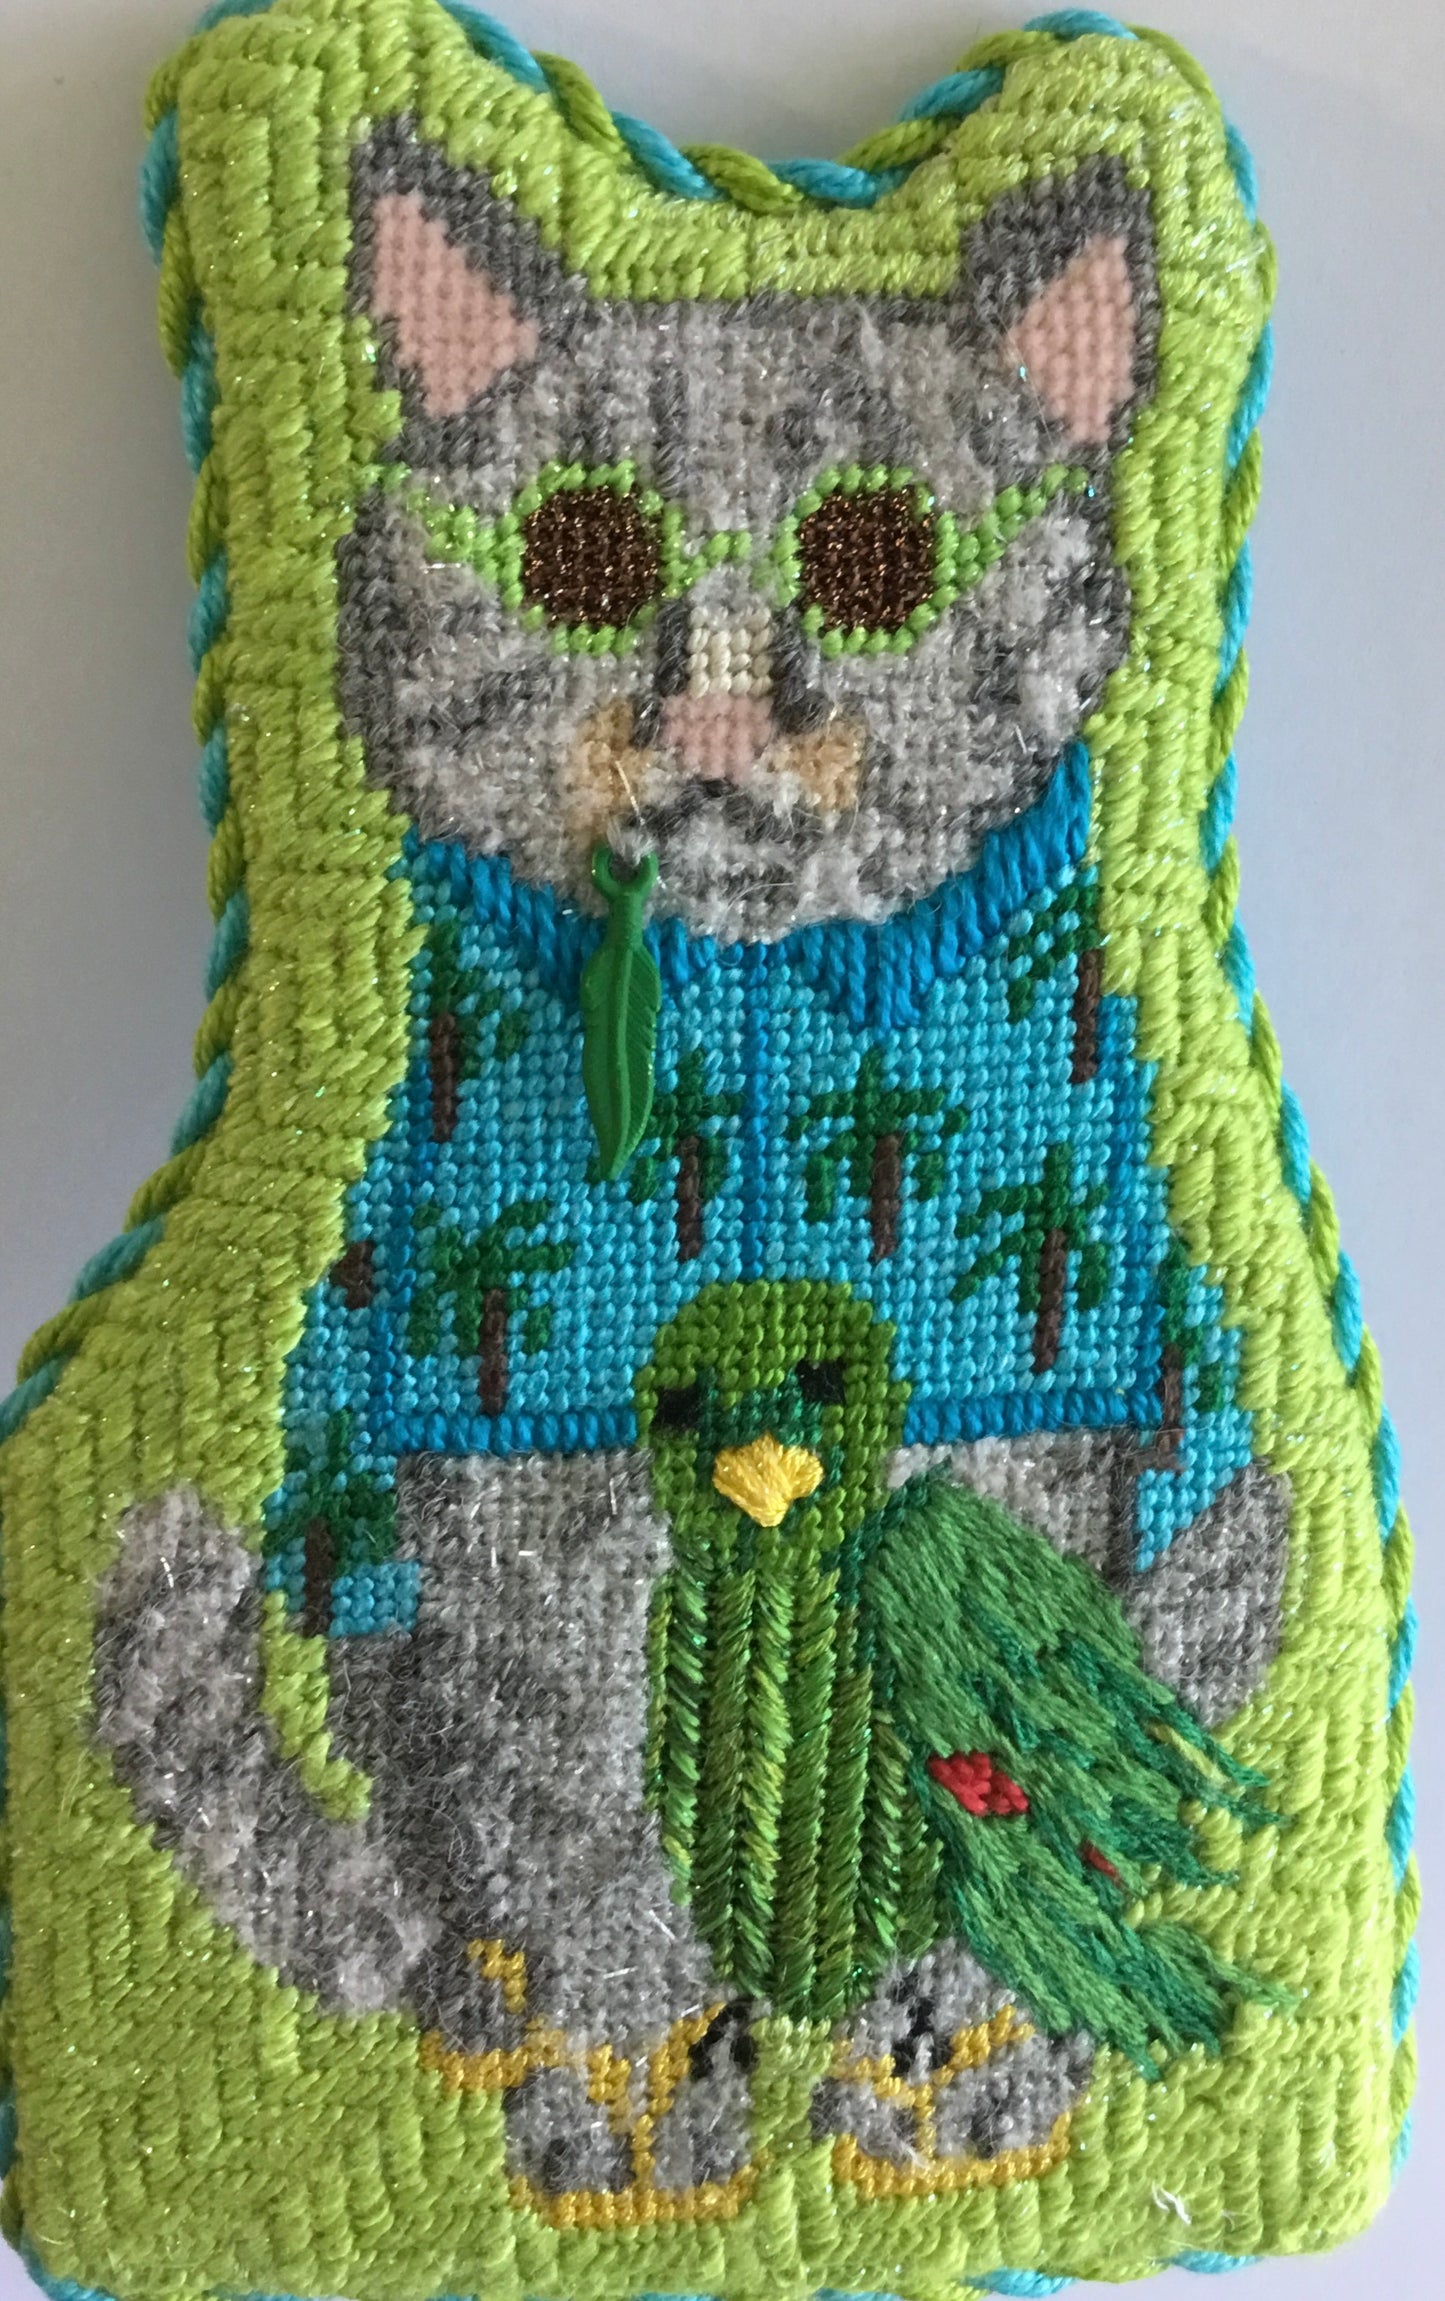 #8 August cat with stitch guide - Guacamole